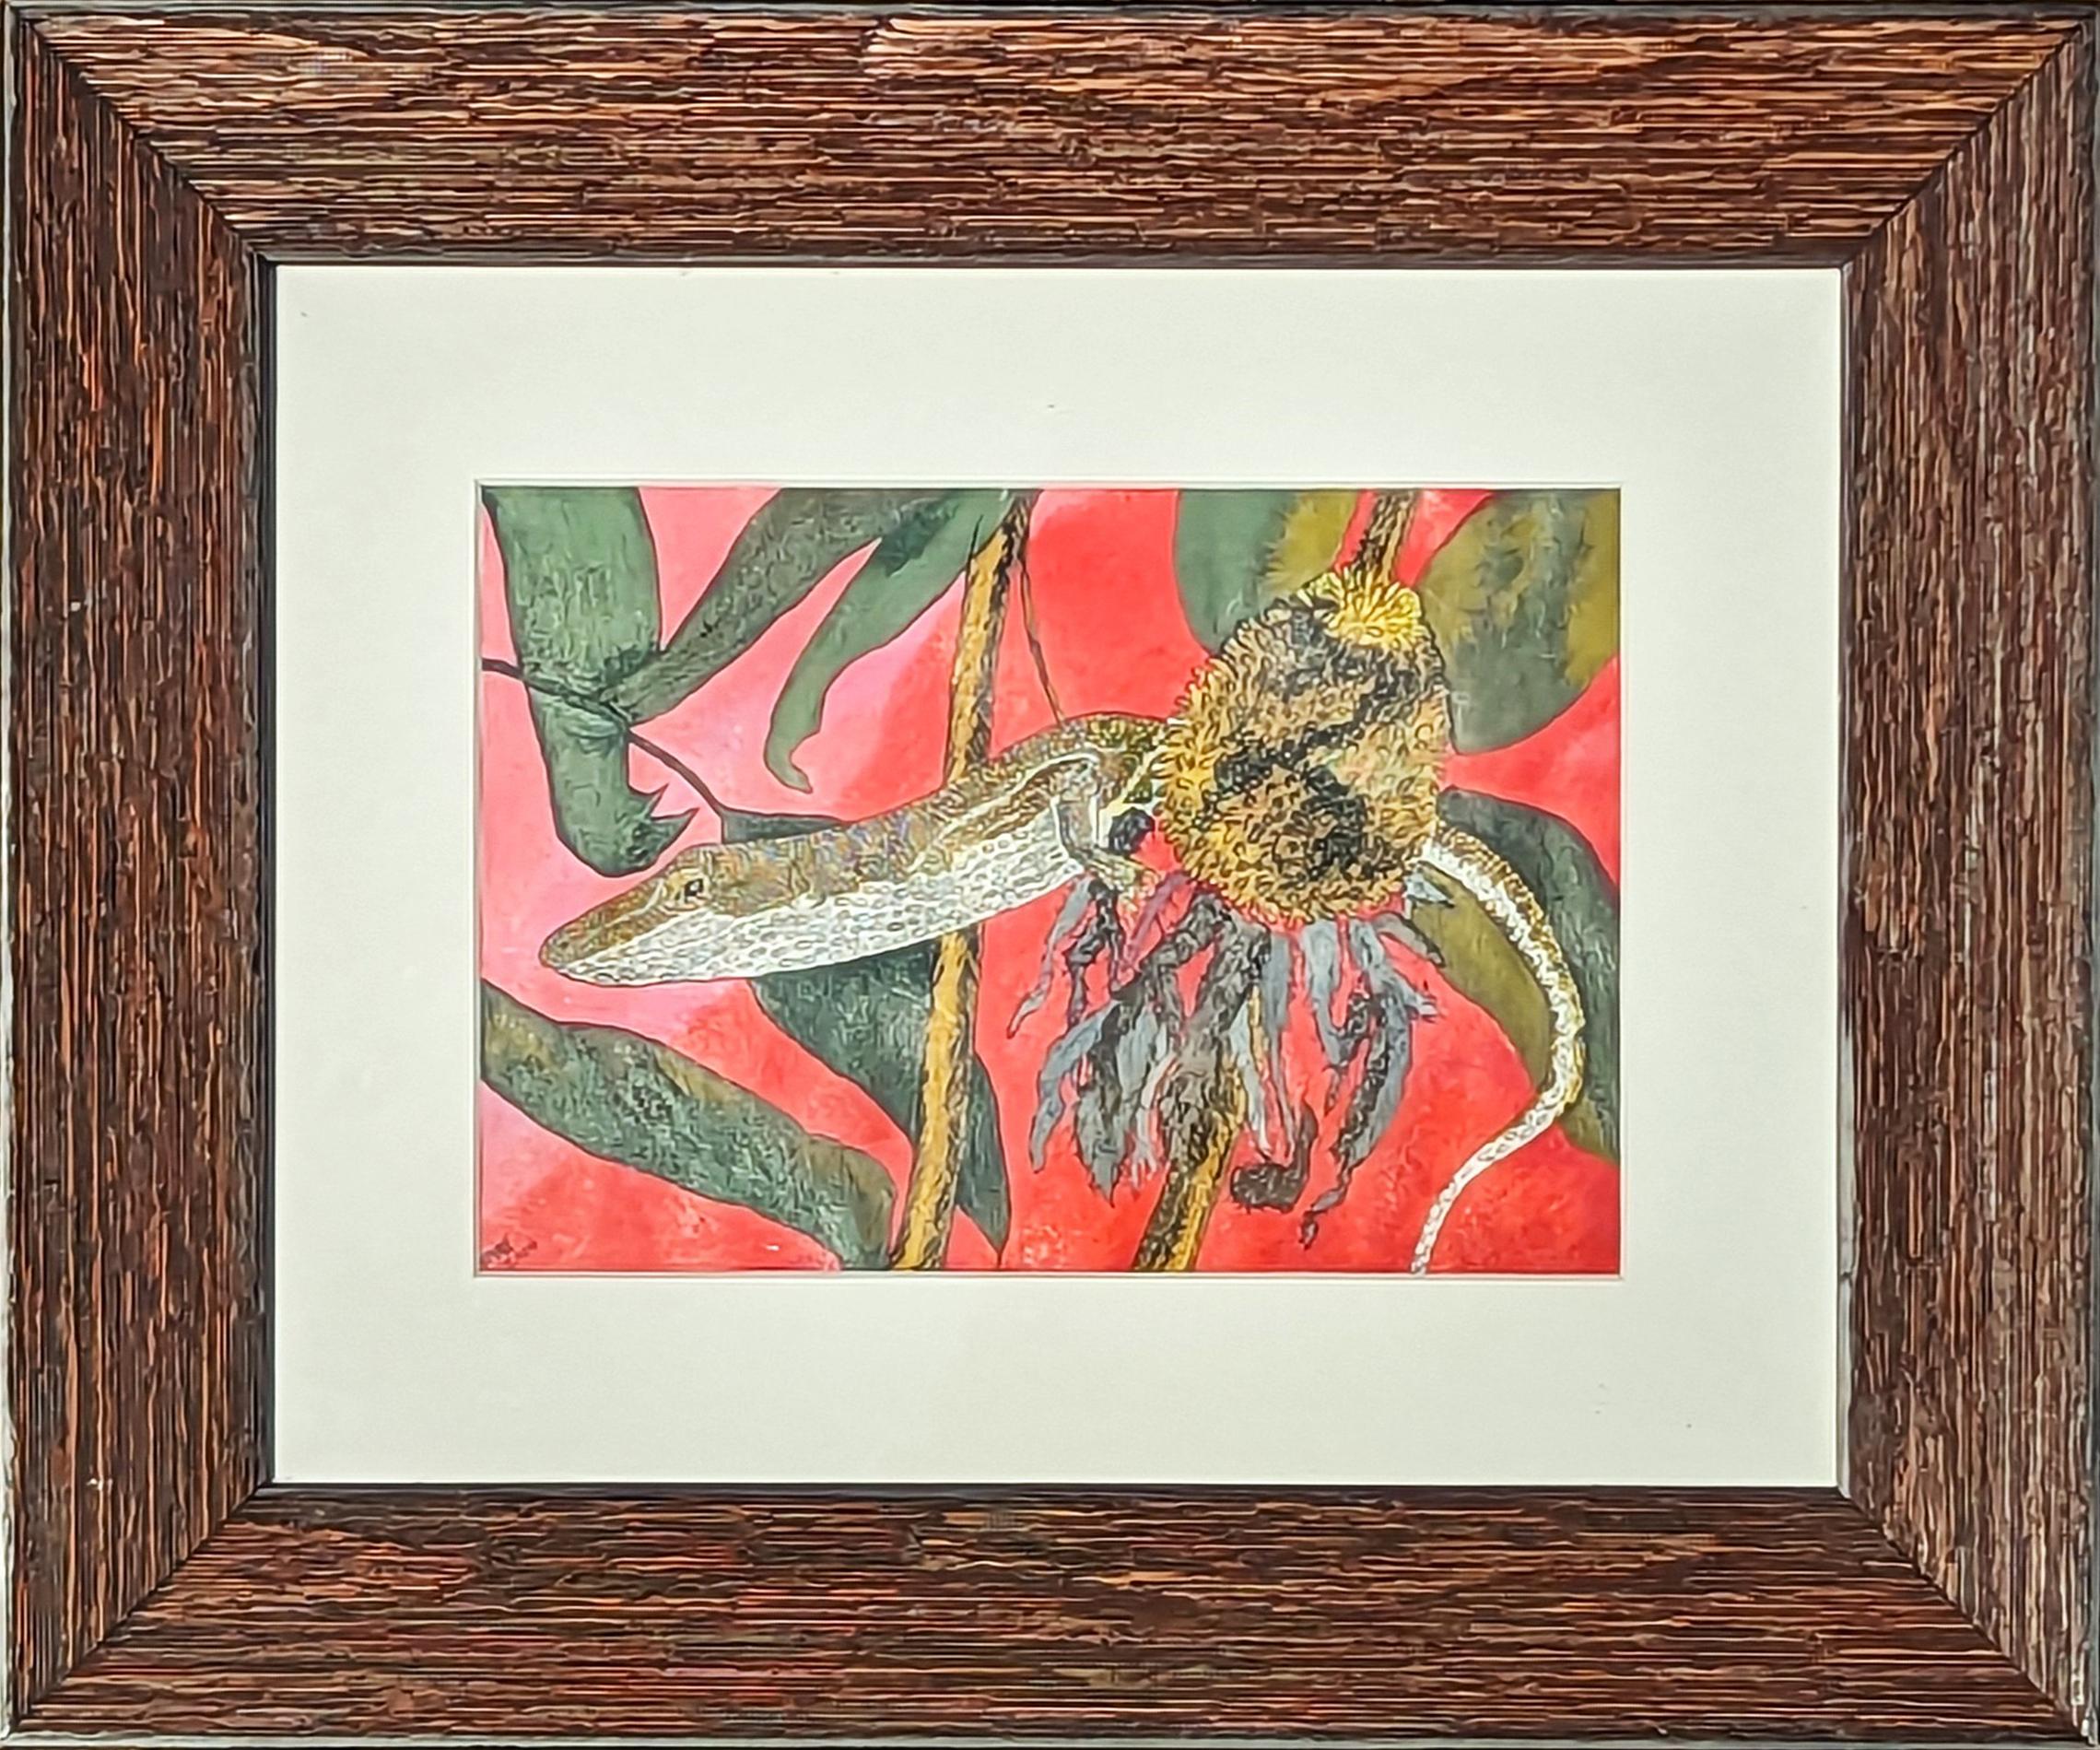 Marguerite Baldwin Animal Art - “Anatole in the Red City” Red & Green Abstract Drawing of a Reptile by a Plant